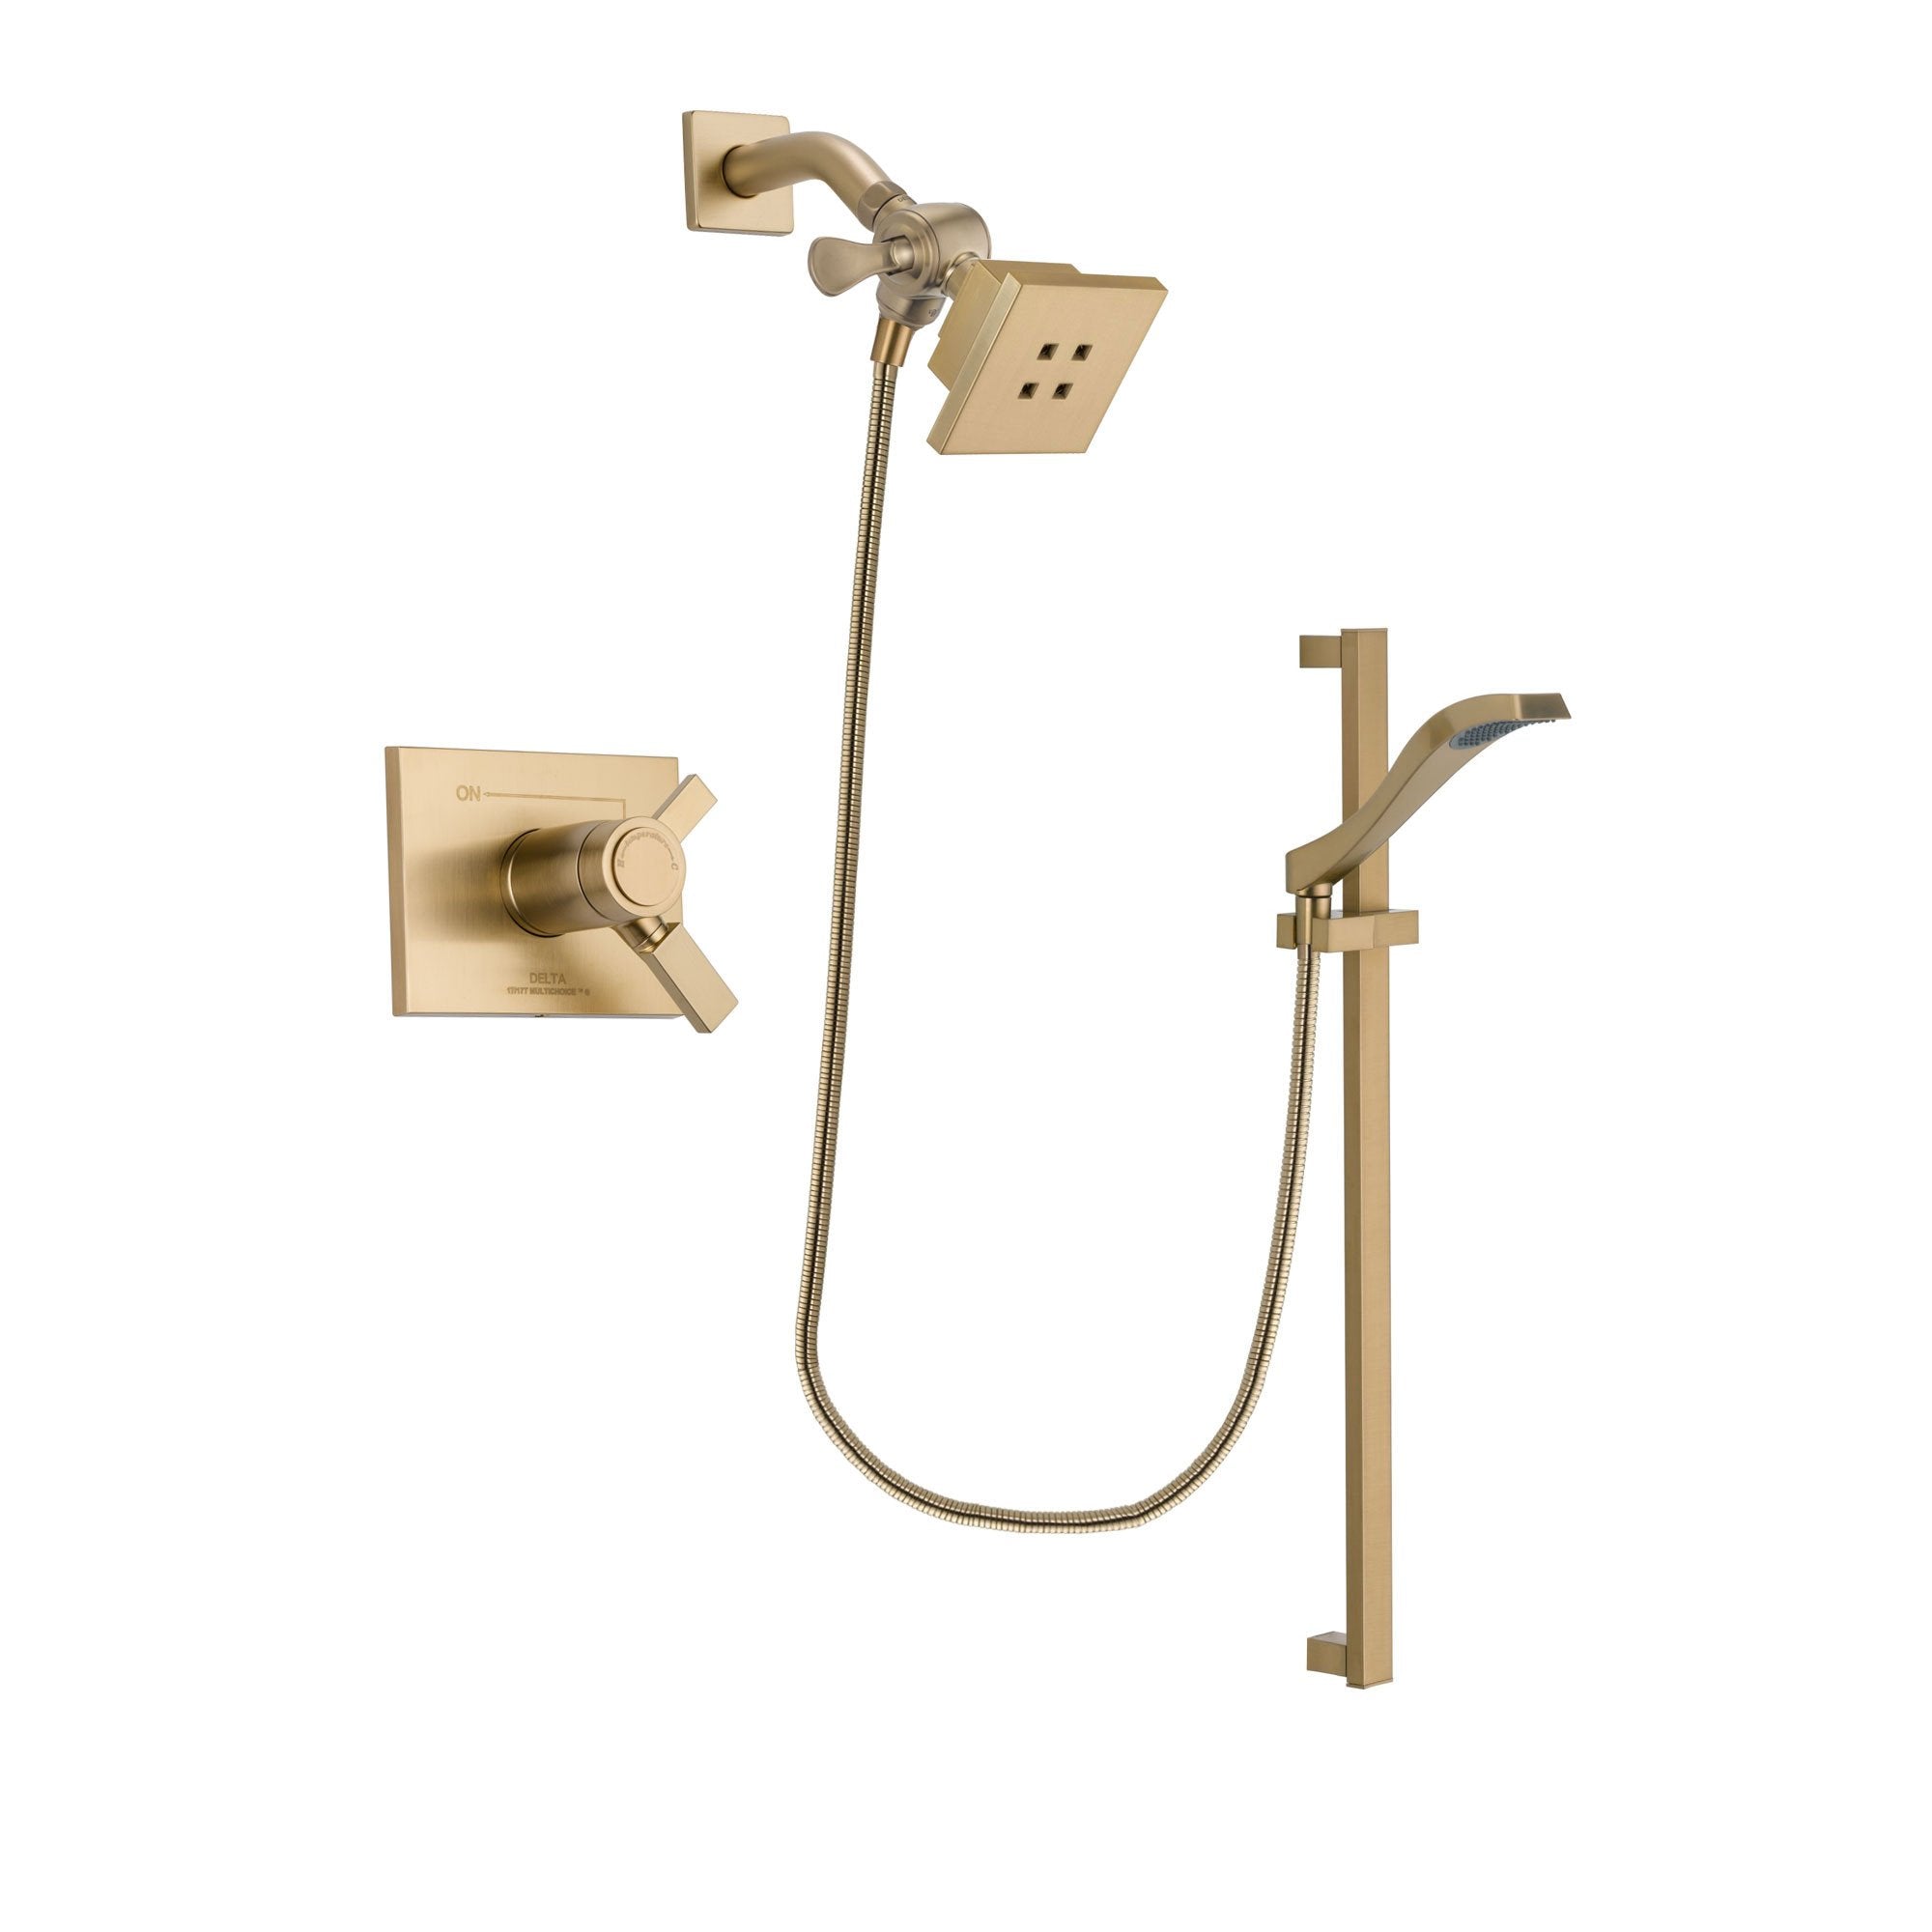 Delta Vero Champagne Bronze Finish Thermostatic Shower Faucet System Package with Square Showerhead and Modern Handheld Shower Spray with Slide Bar Includes Rough-in Valve DSP3912V